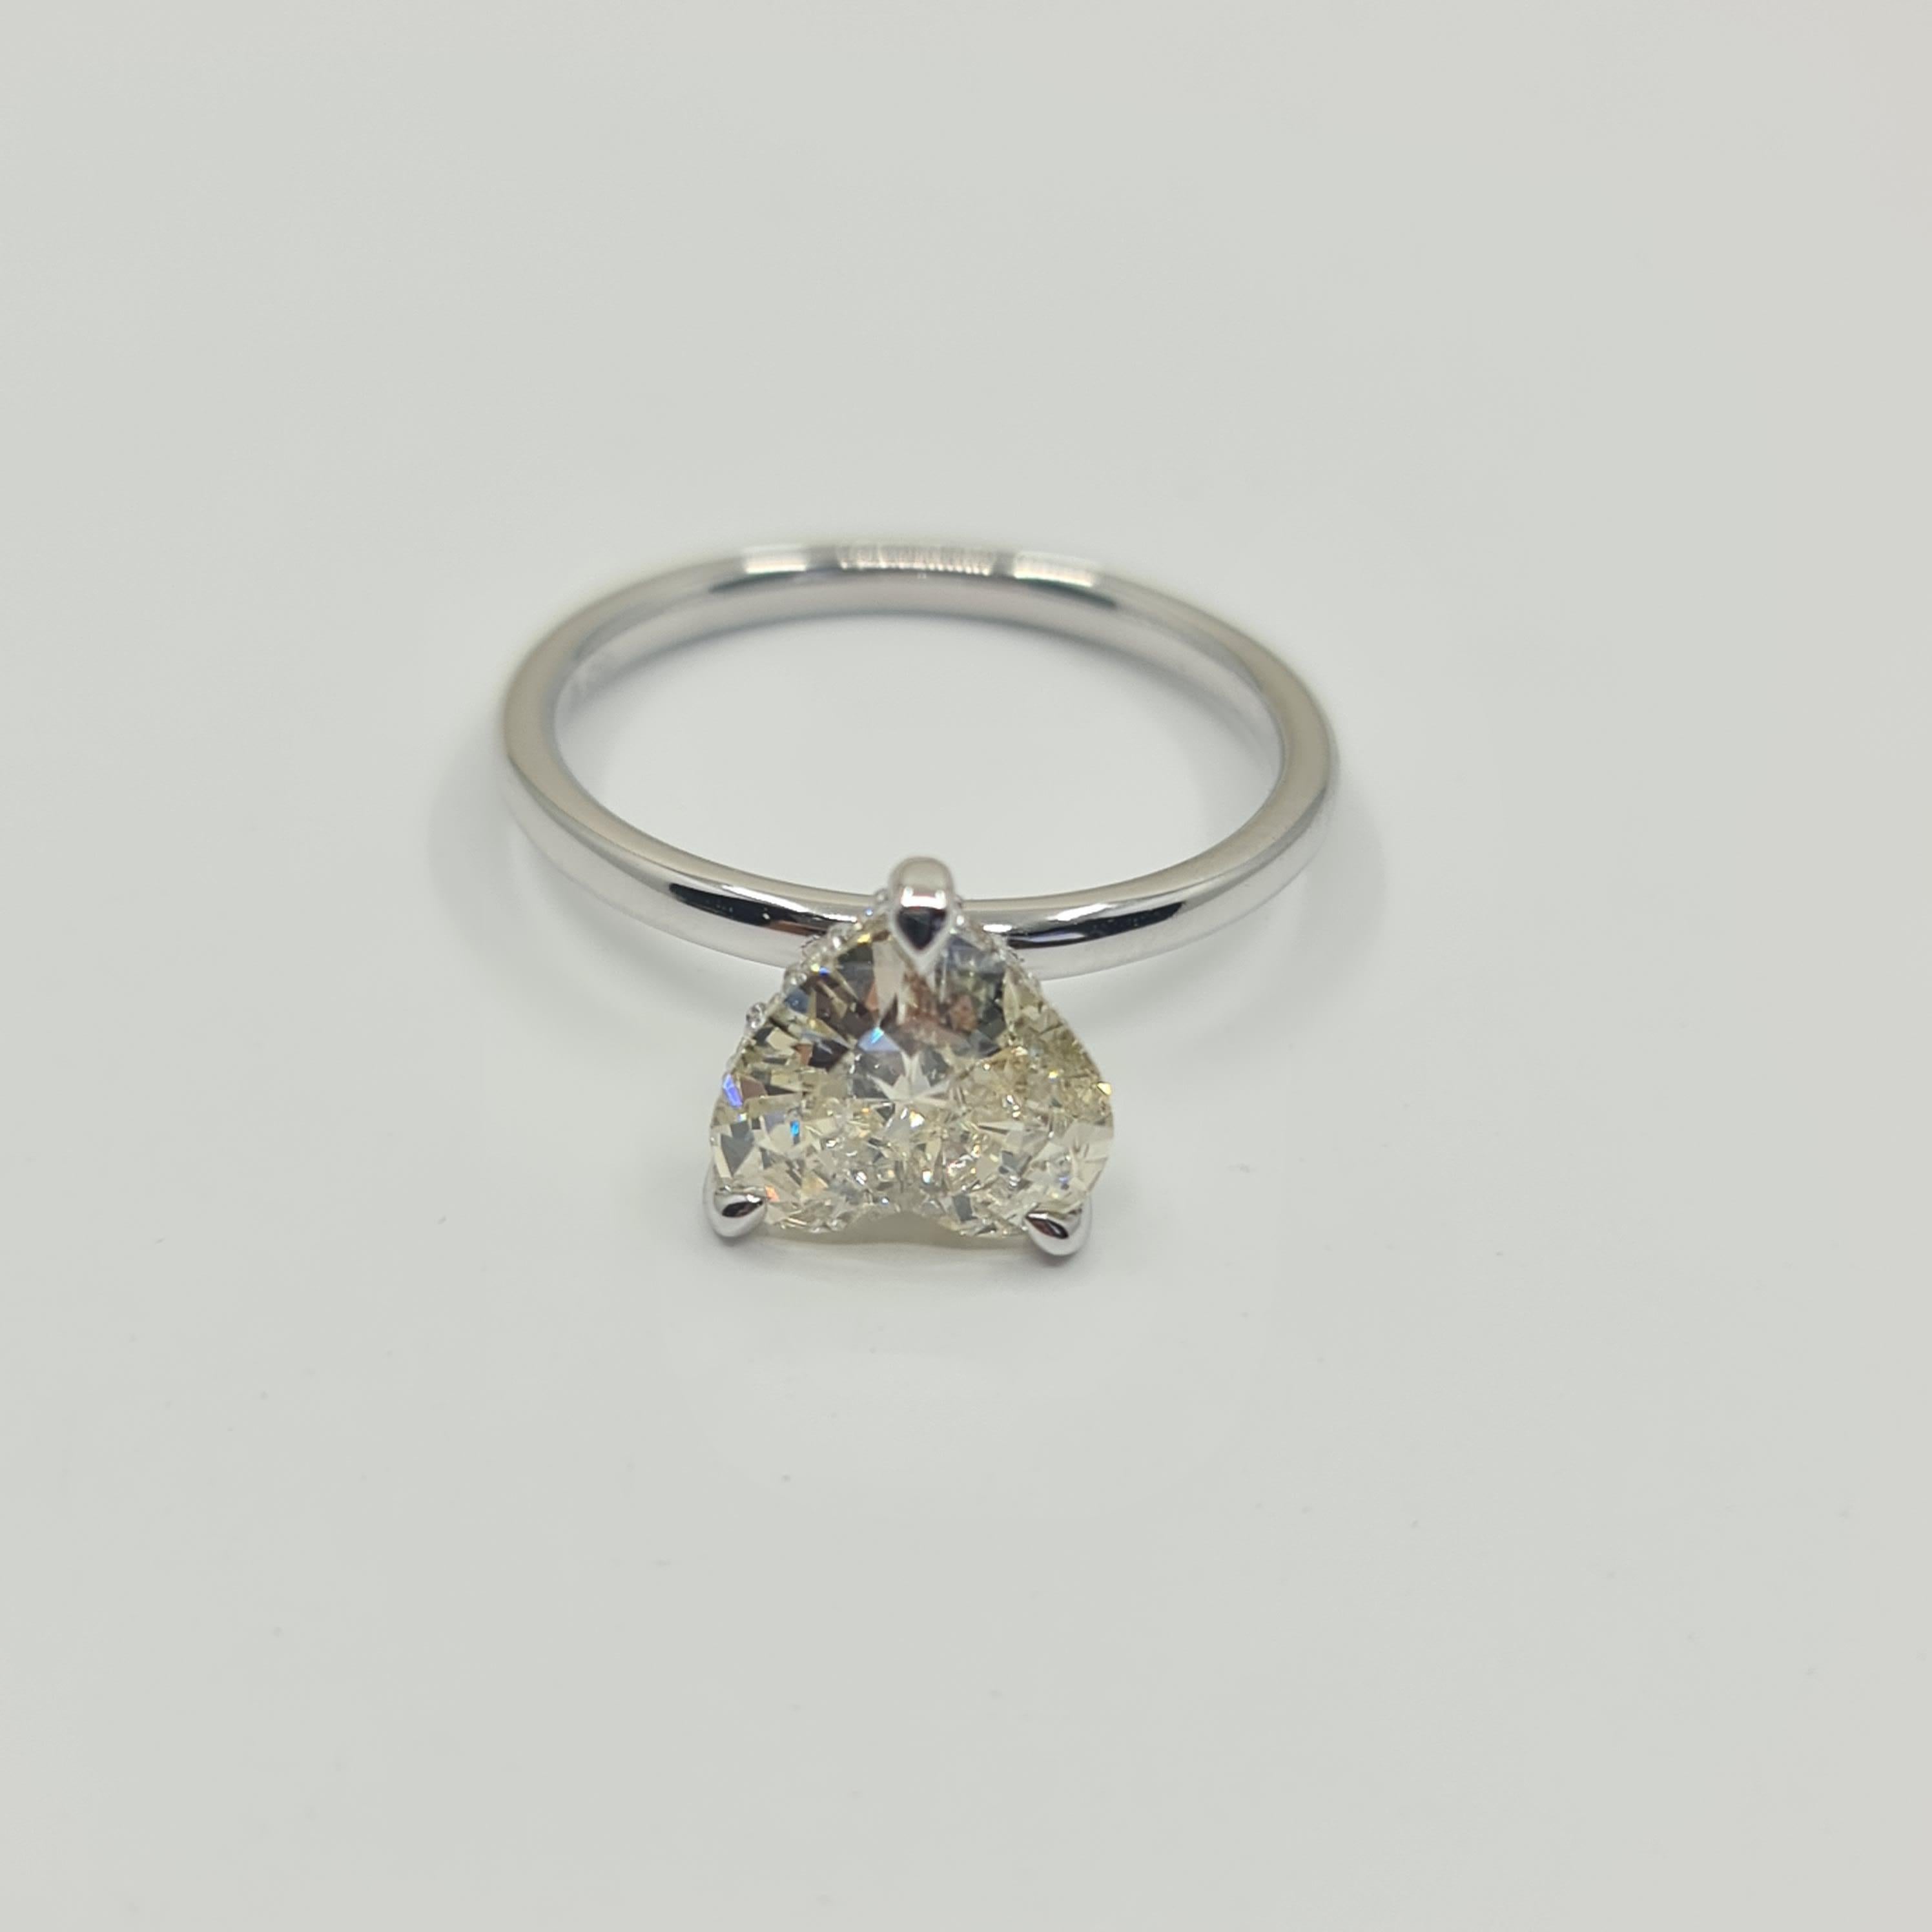 Exquisite GIA Certified 1.60 Carat Heart Diamond Ring with 0.07 Carat Halo G/VS For Sale 10